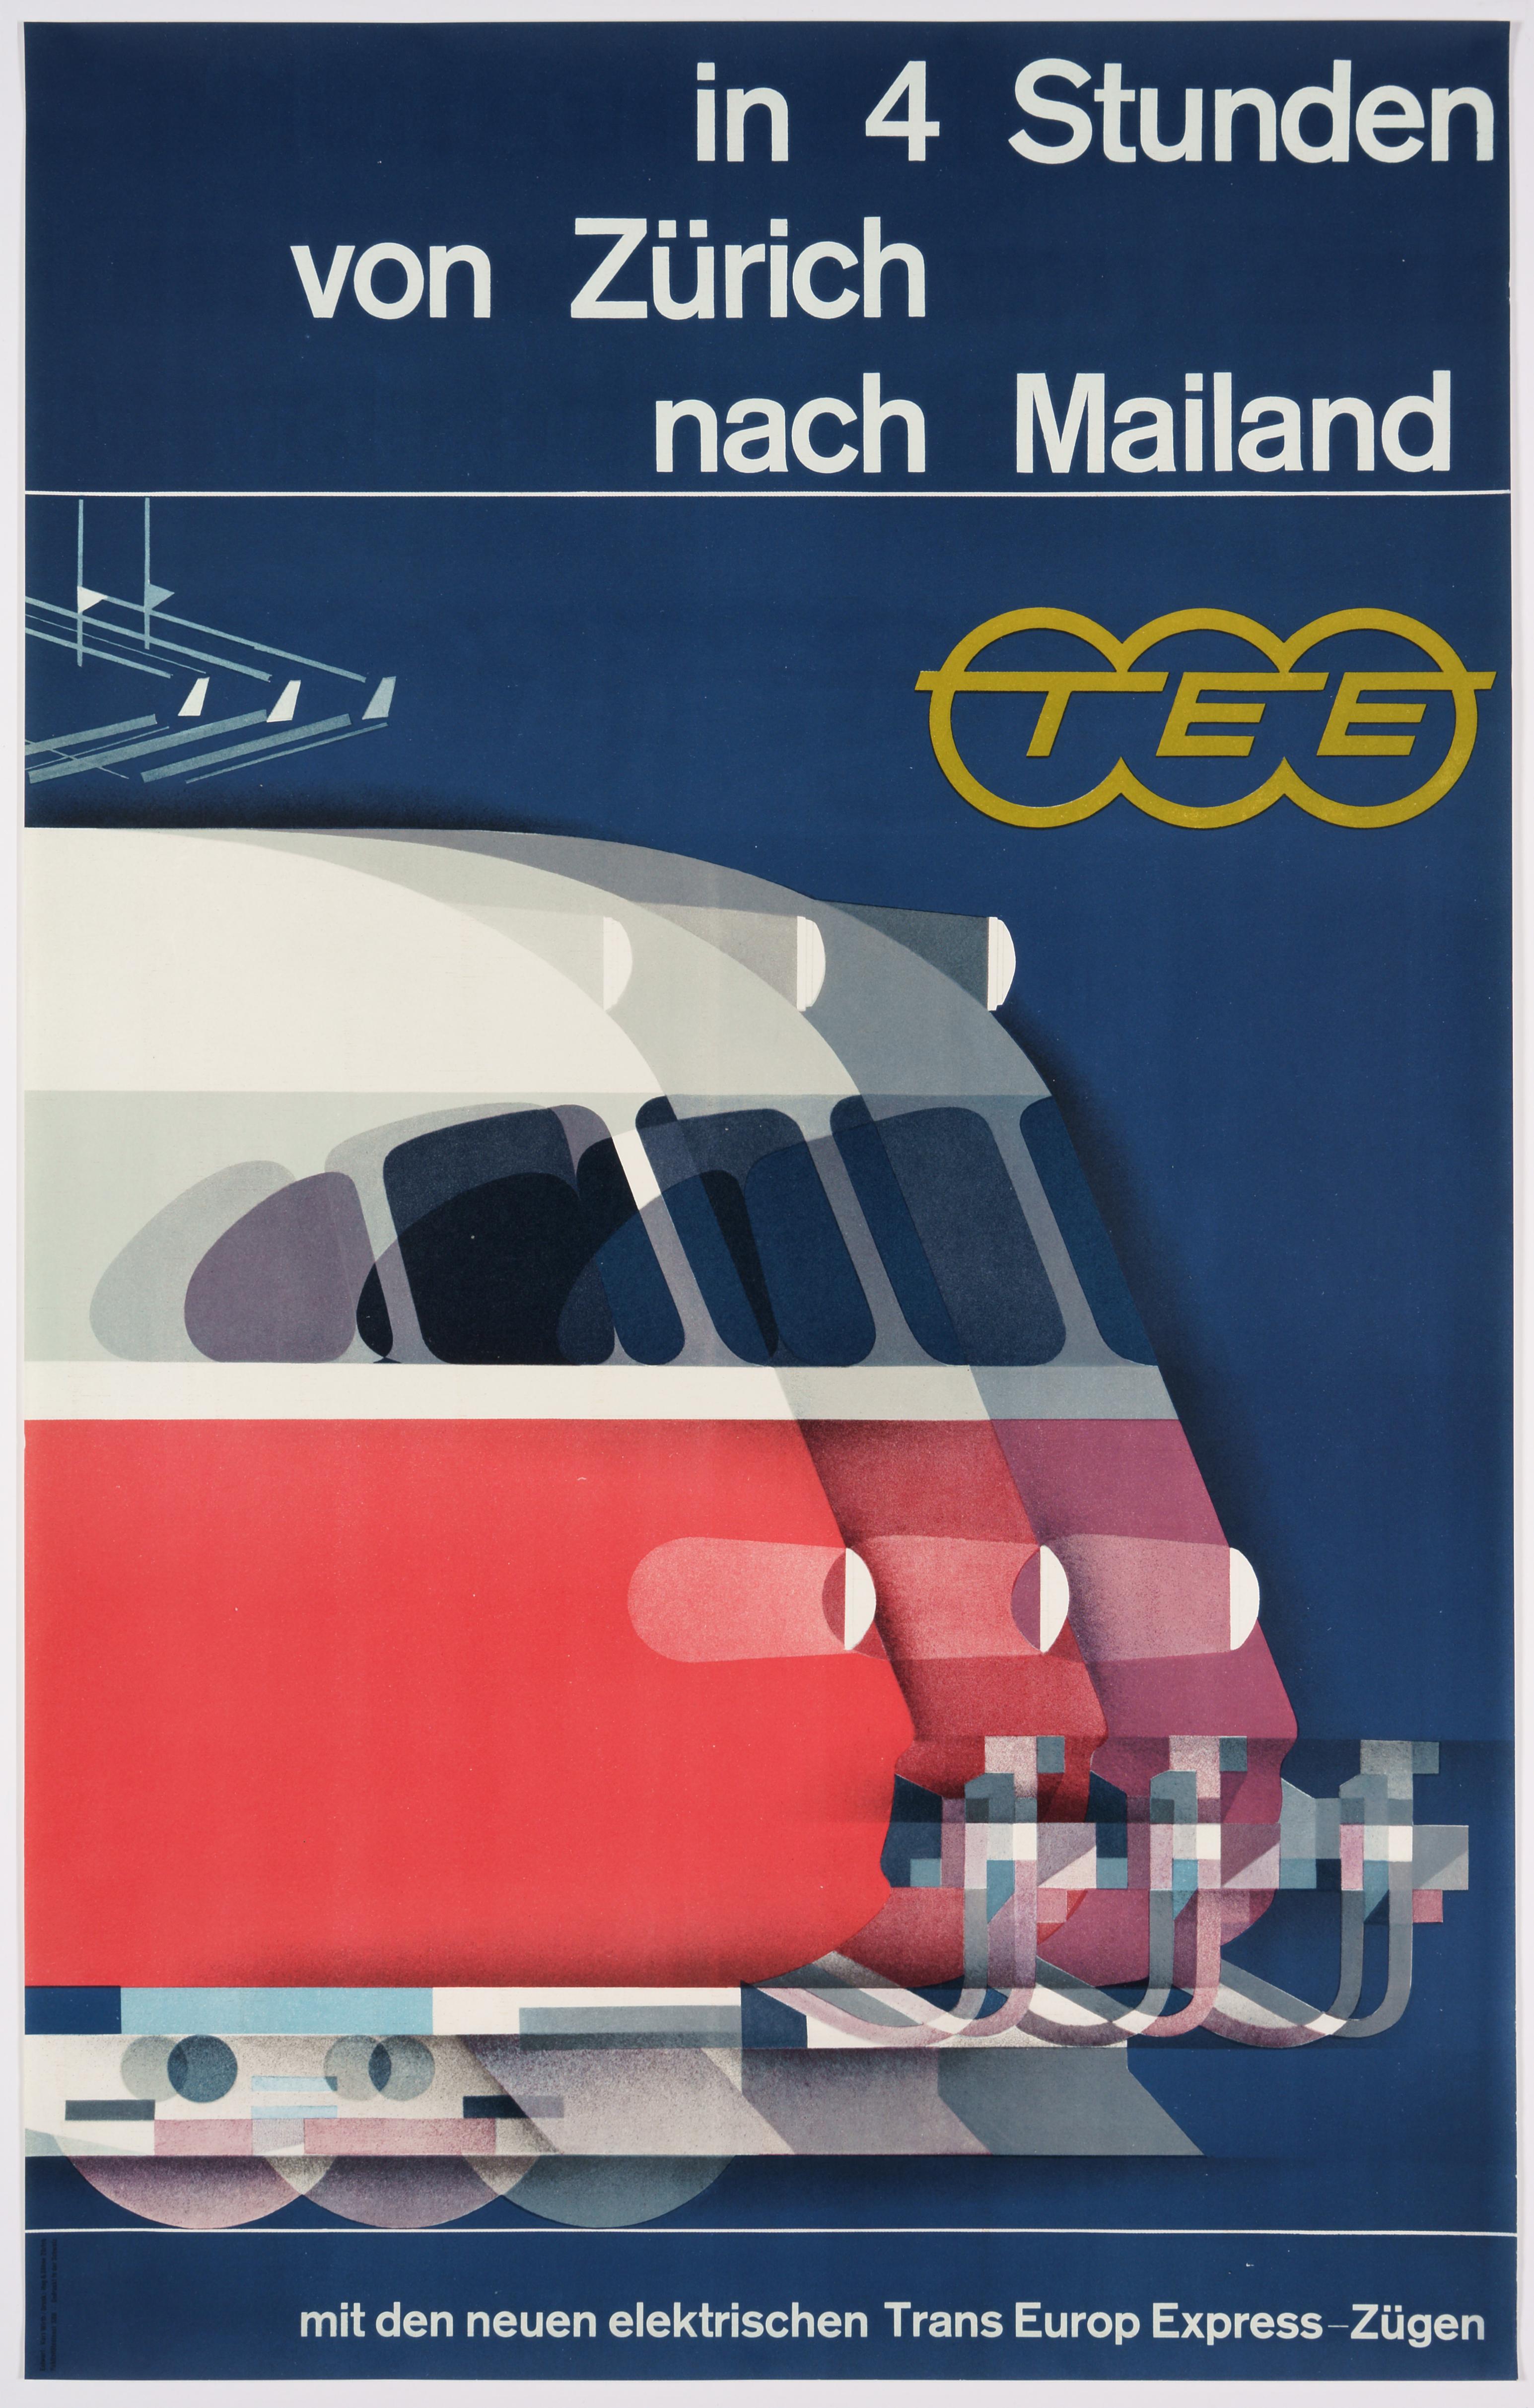 Trans Europ Express – Original Poster promoting the service from Zurich to Milan